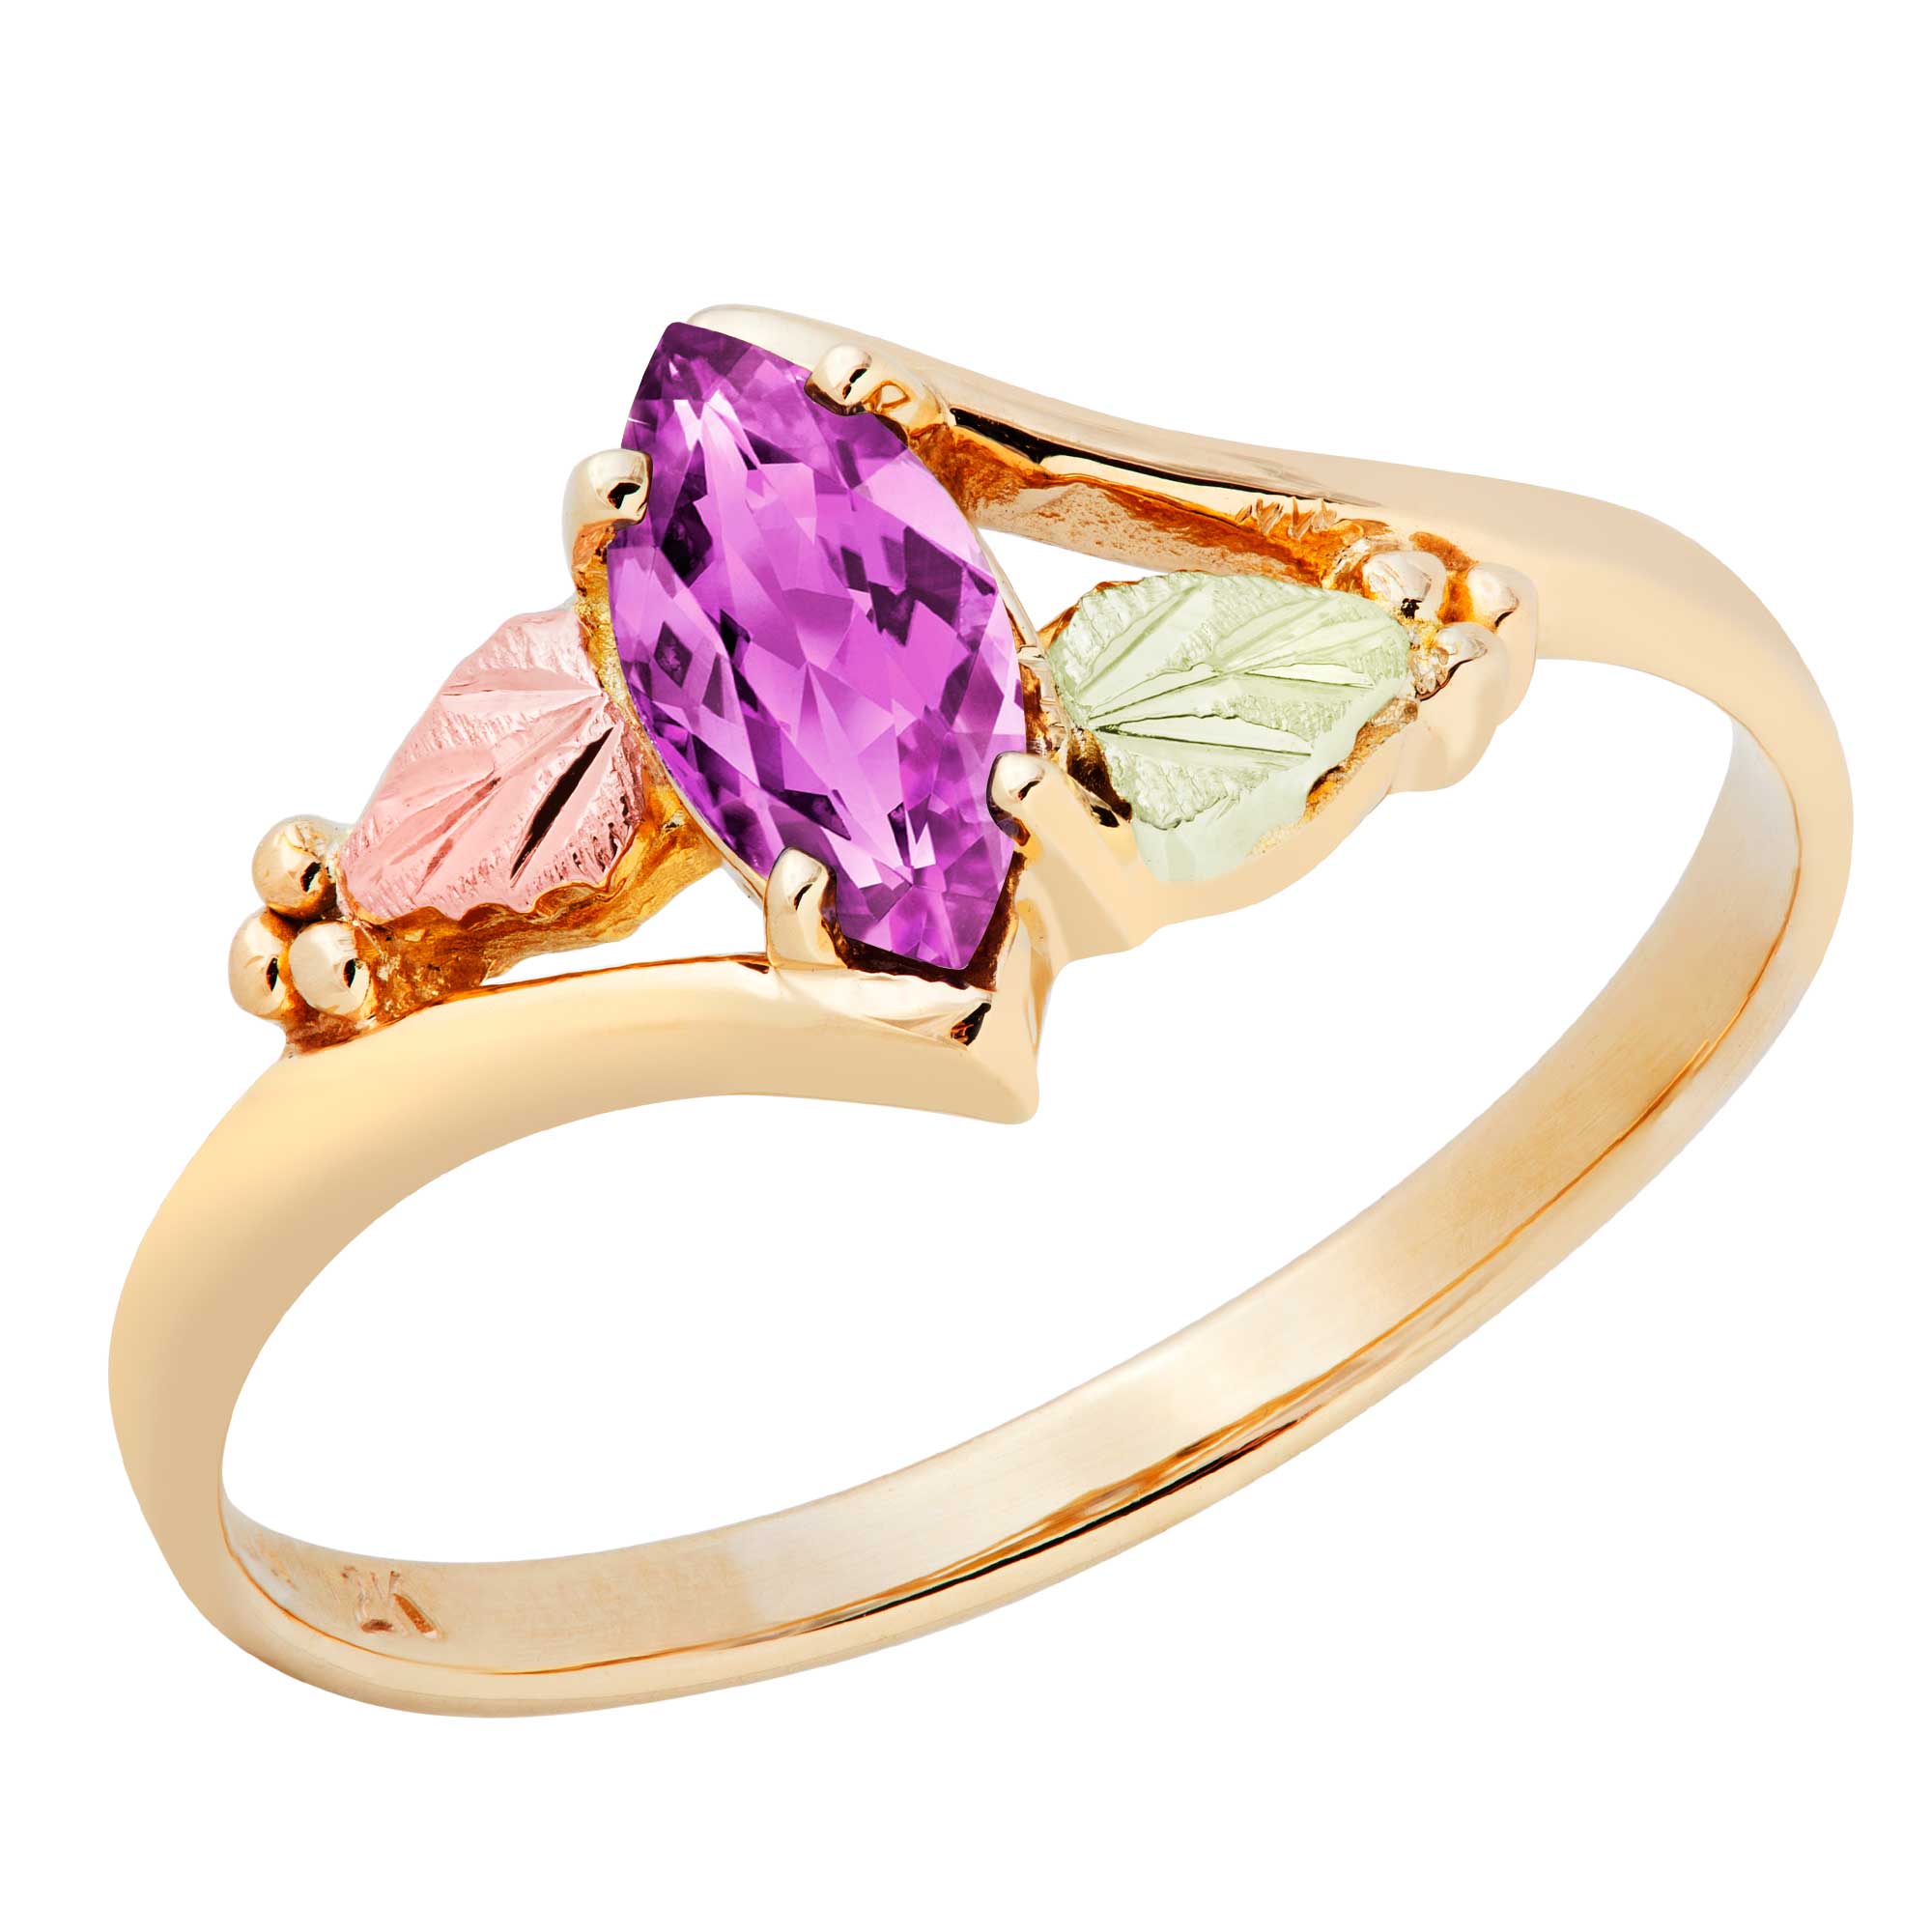 Created Alexandrite Marquise June Birthstone Bypass Ring, Black Hills Gold motif. 